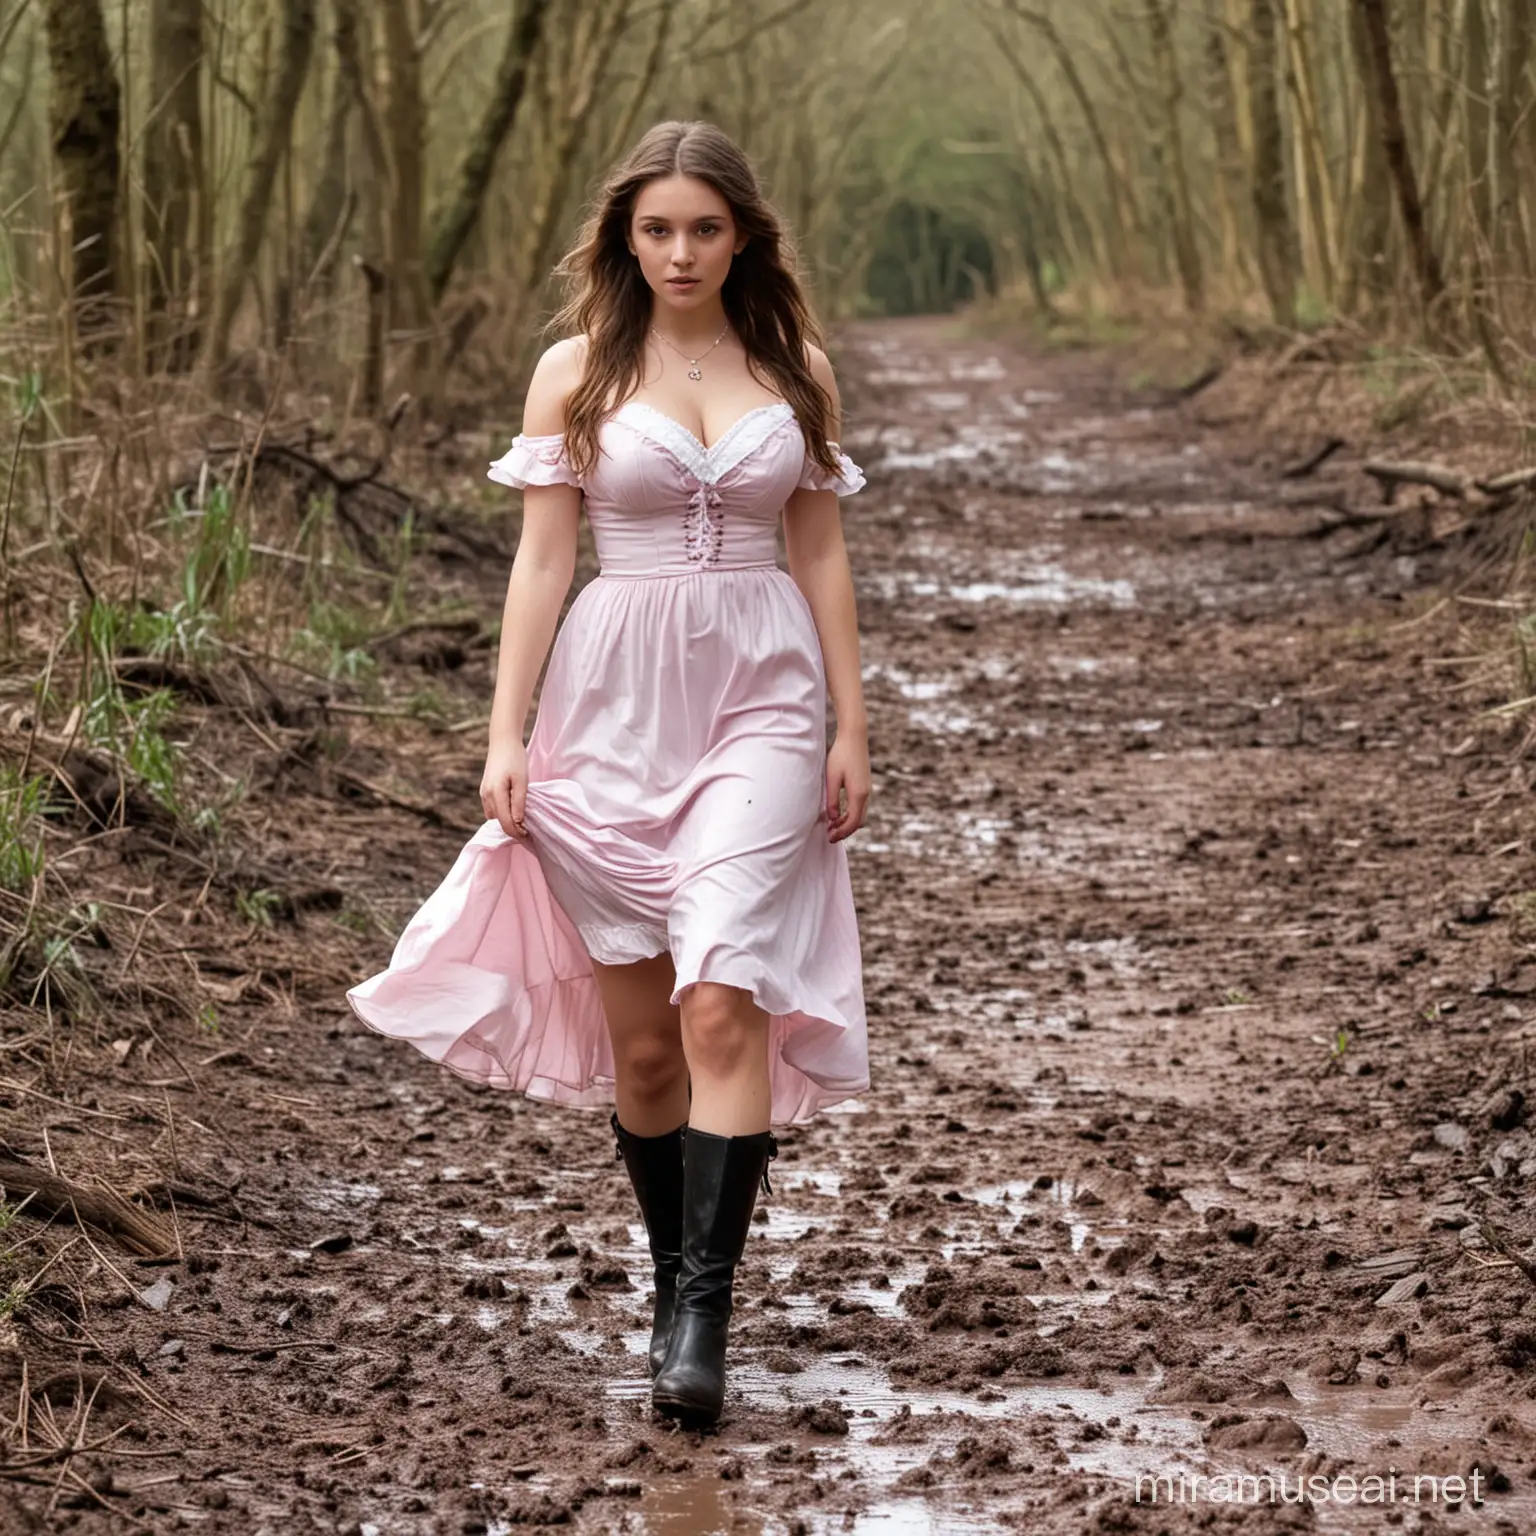 Victorian Teenage Girl in Pink Party Dress Strolling Through a Muddy Forest